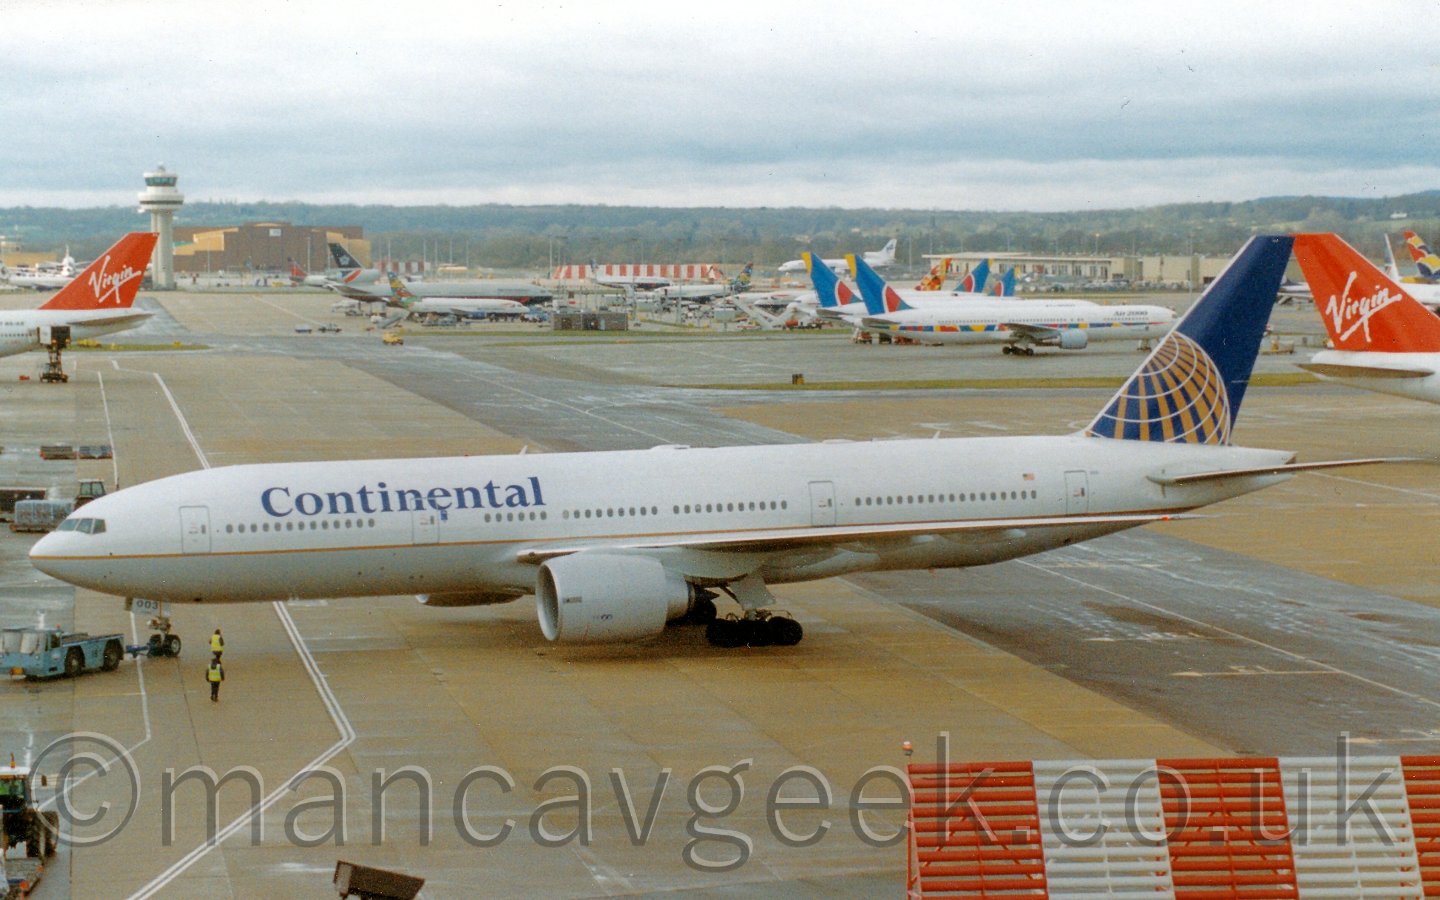 Side view of a white, twin engined jet airliner, being pushed back from it's stand by a blue truck attached to the nose wheel. In the background is a busy scene from an airport, with many planes parked in various areas, under a cloudy white sky.